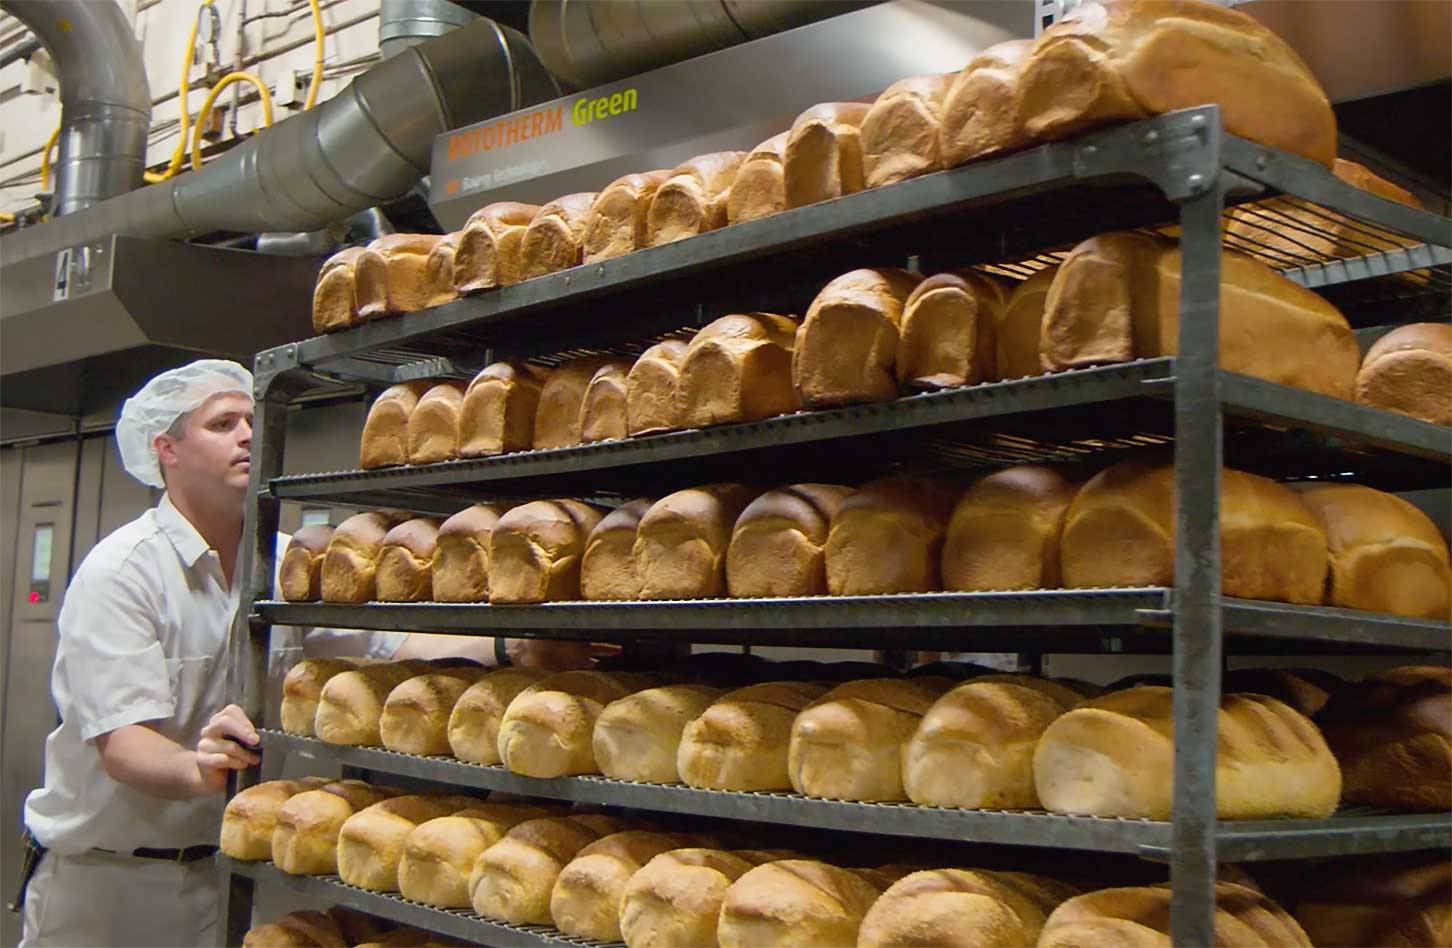 WP Bakery Group USA, Retail, Wholesale and Industrial Baking Equipment and Food Service Equipment, Shelton, CT USA